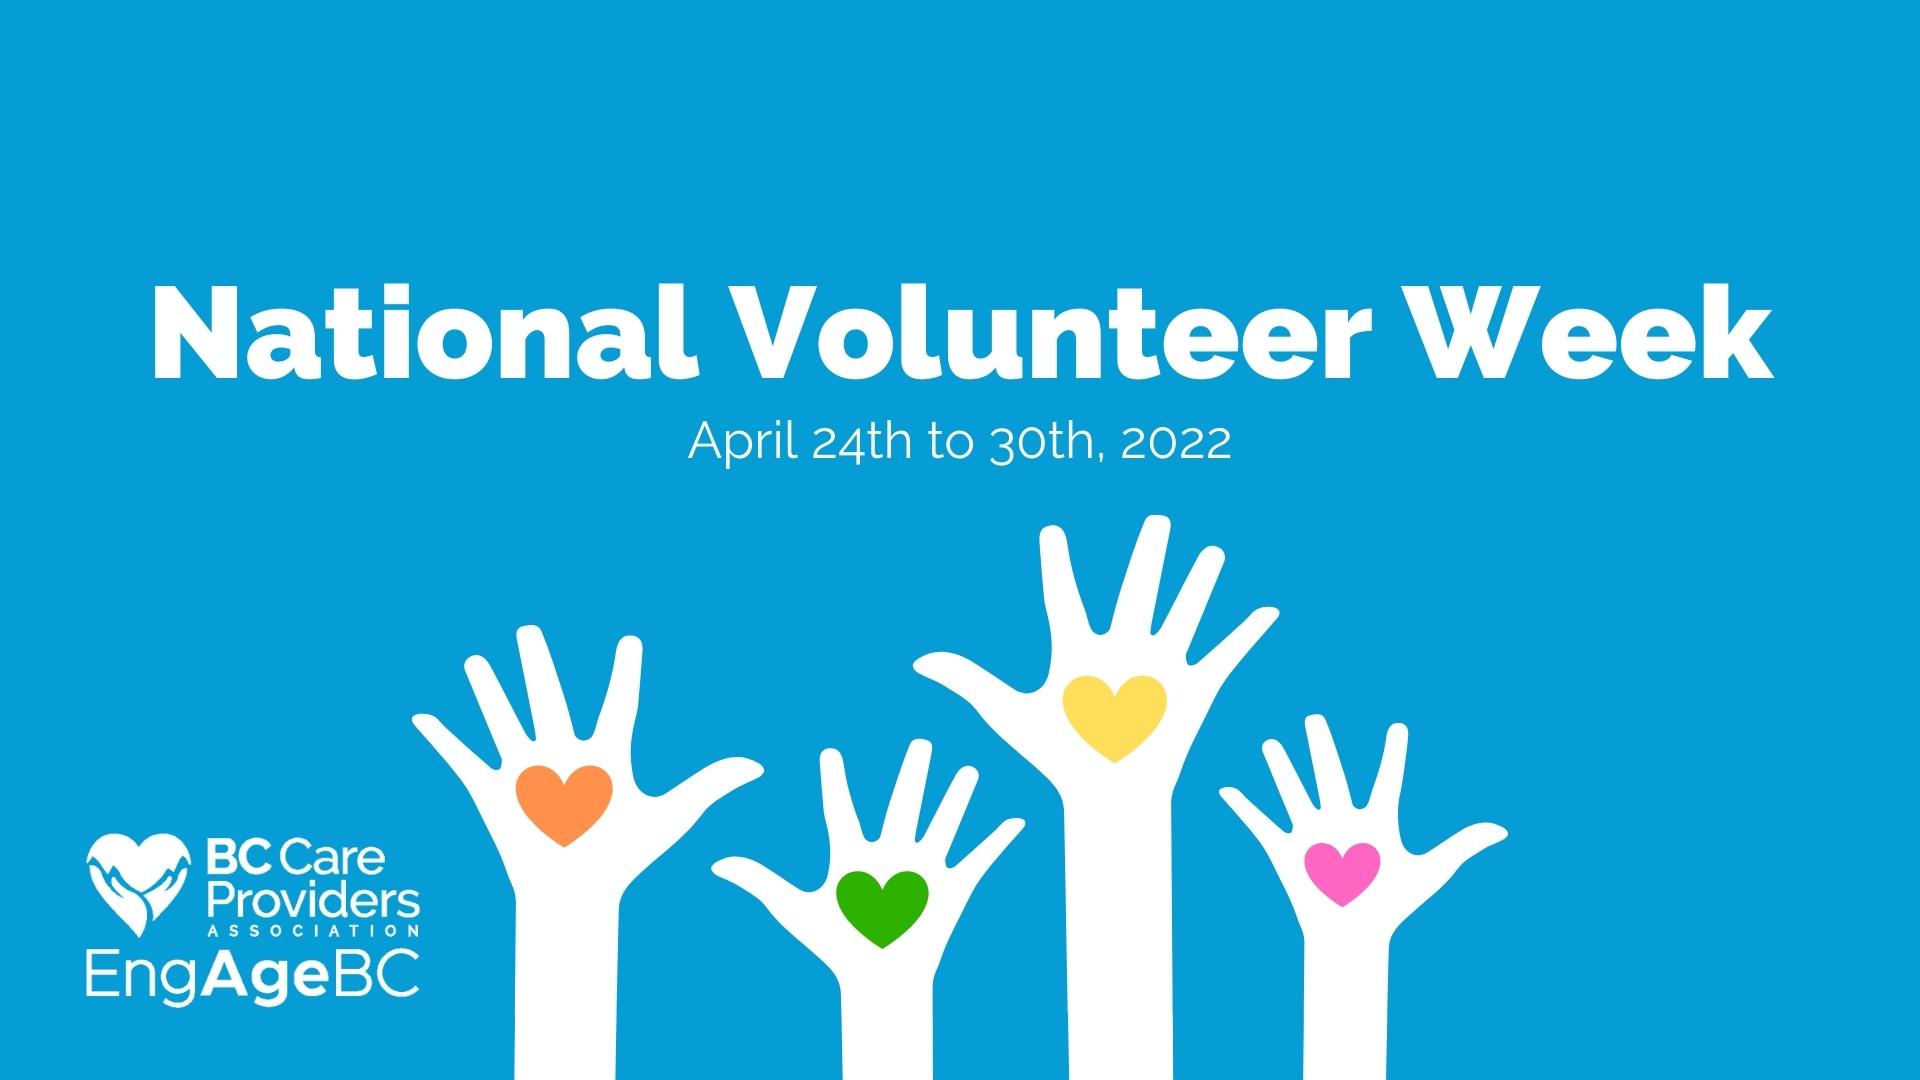 BCCPA and EngAge BC want to celebrate your volunteers!